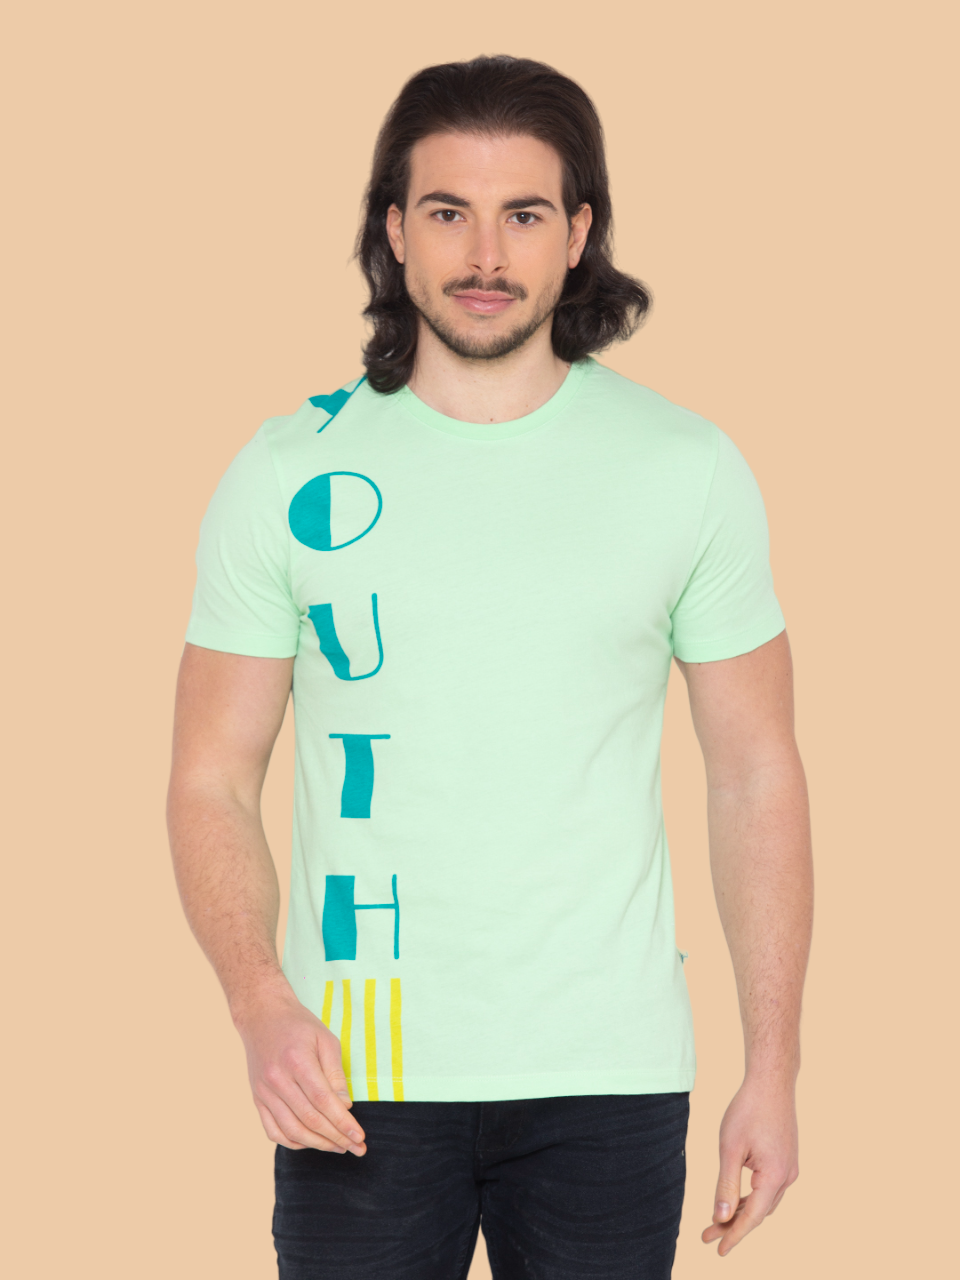 Flawless Men Cotton Green T-Shirt Being Flawless